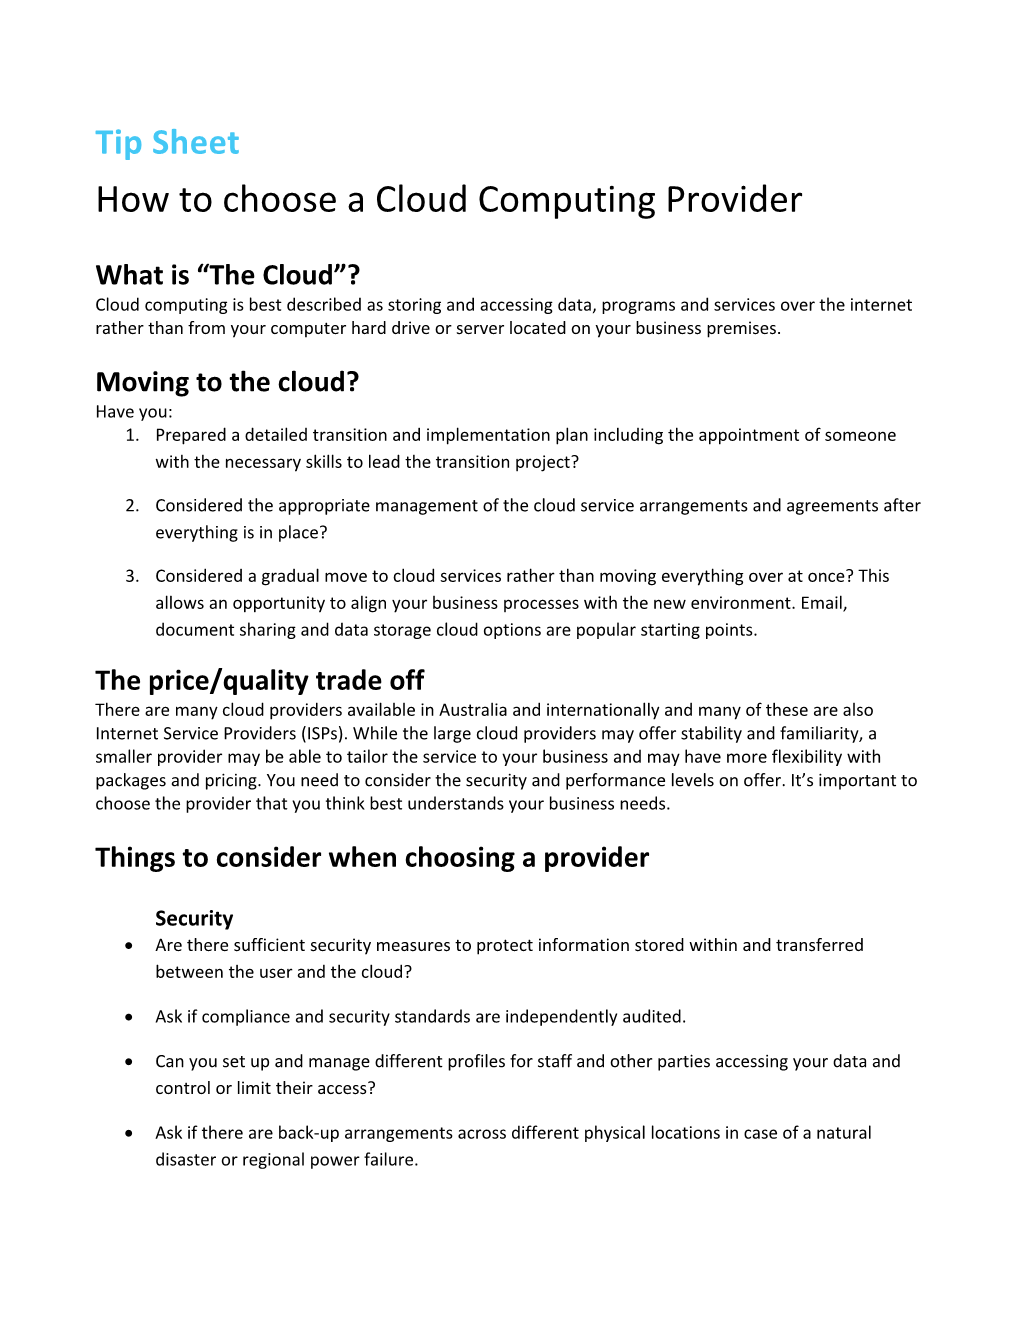 How to Choose a Cloud Computing Provider